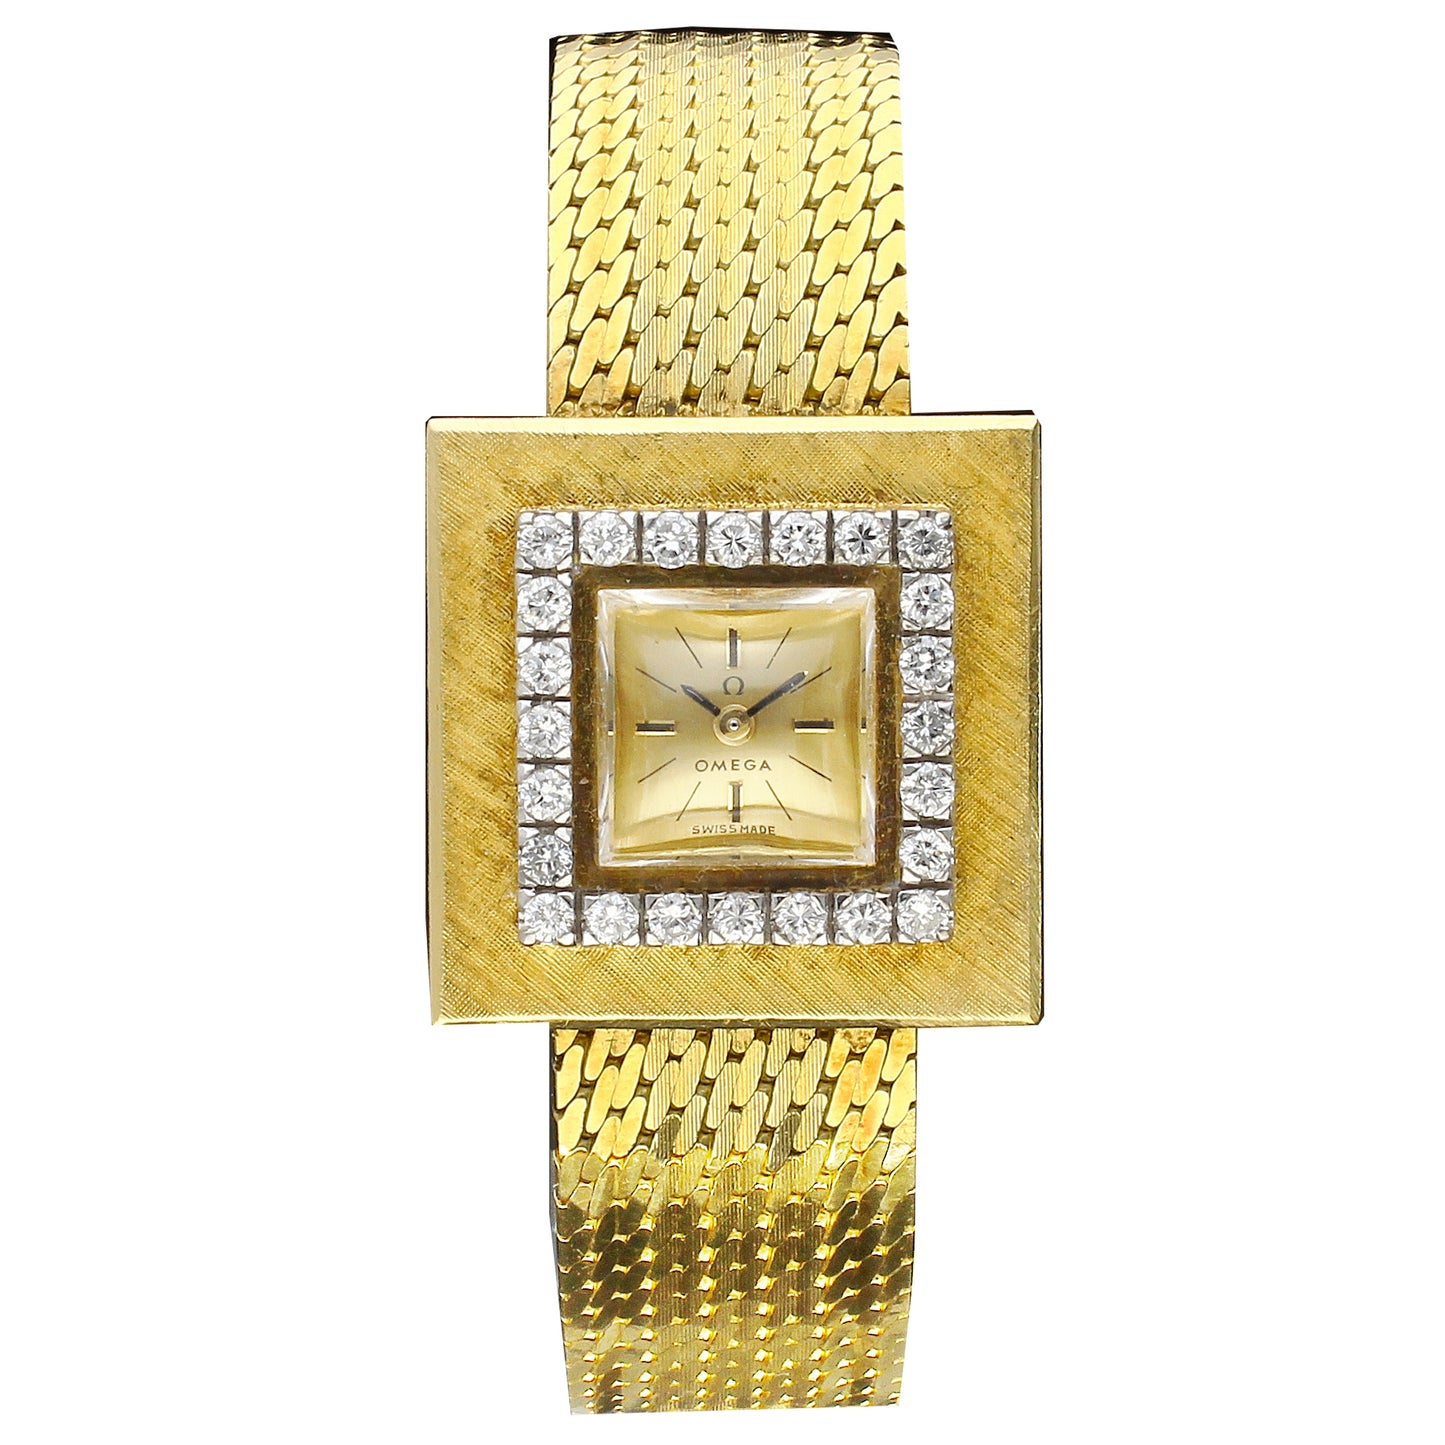 18ct yellow gold and diamond set square case bracelet watch. Made 1961